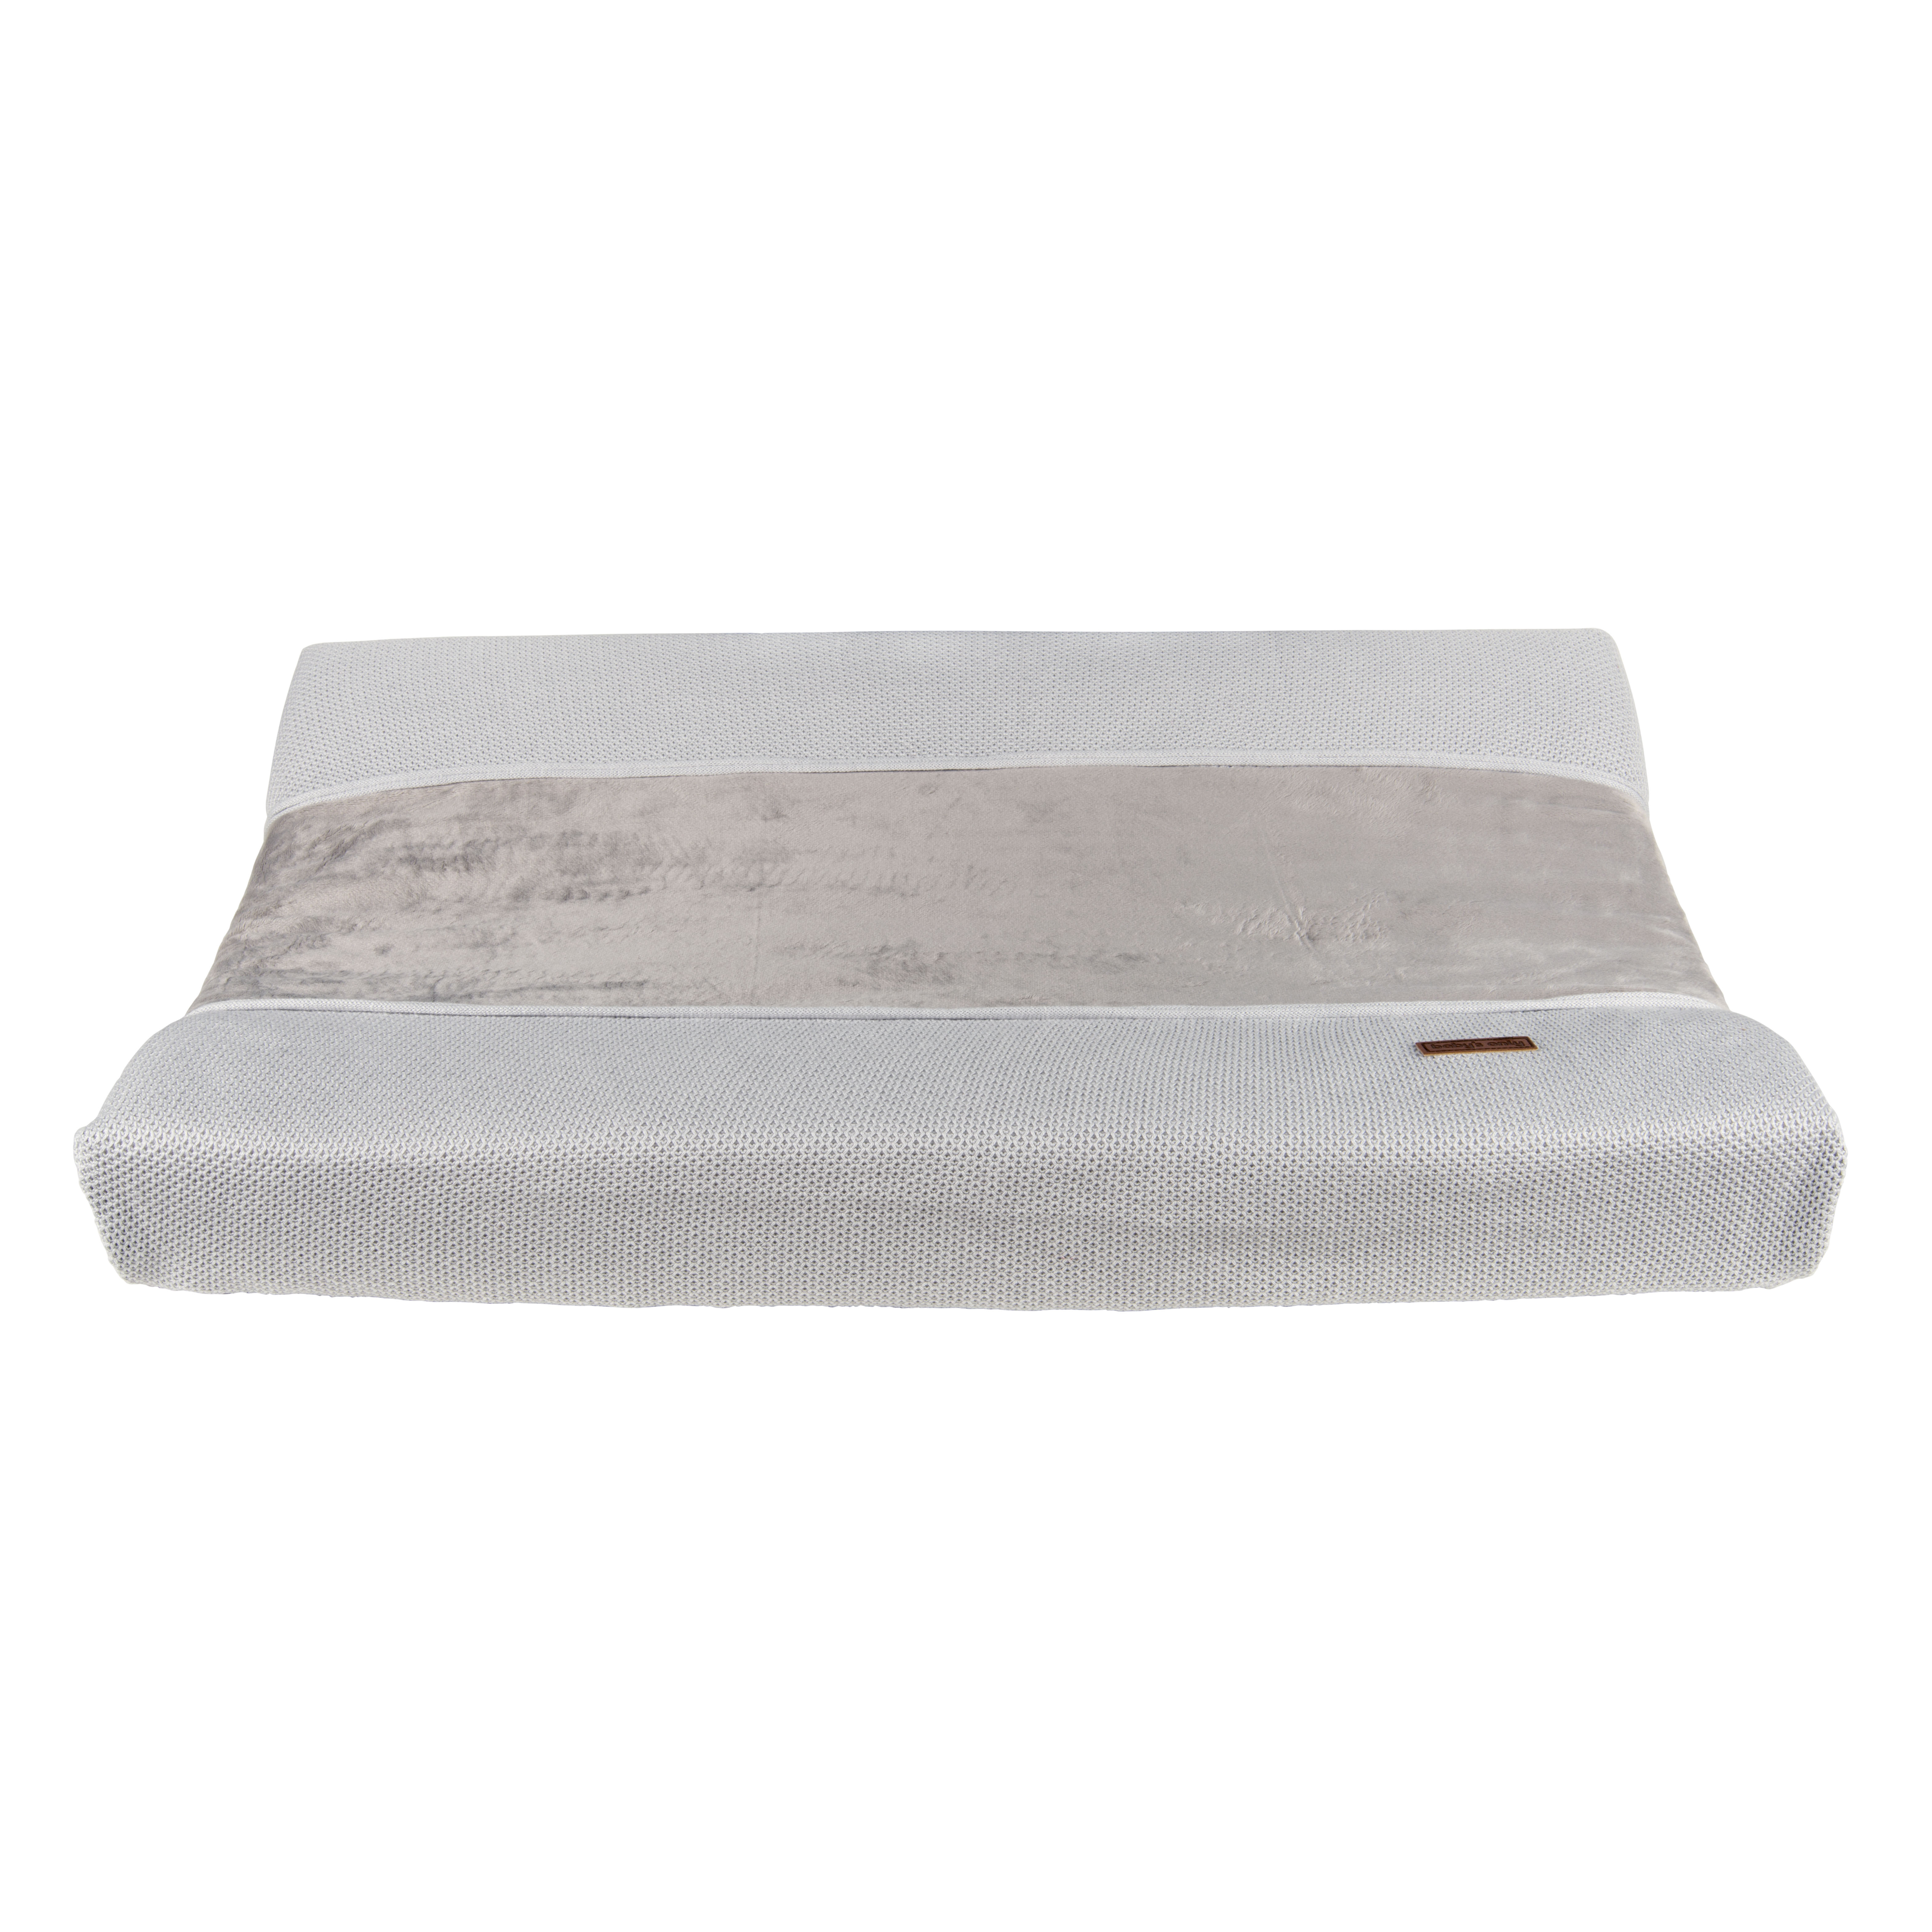 Changing pad cover Classic silver-grey - 45x70